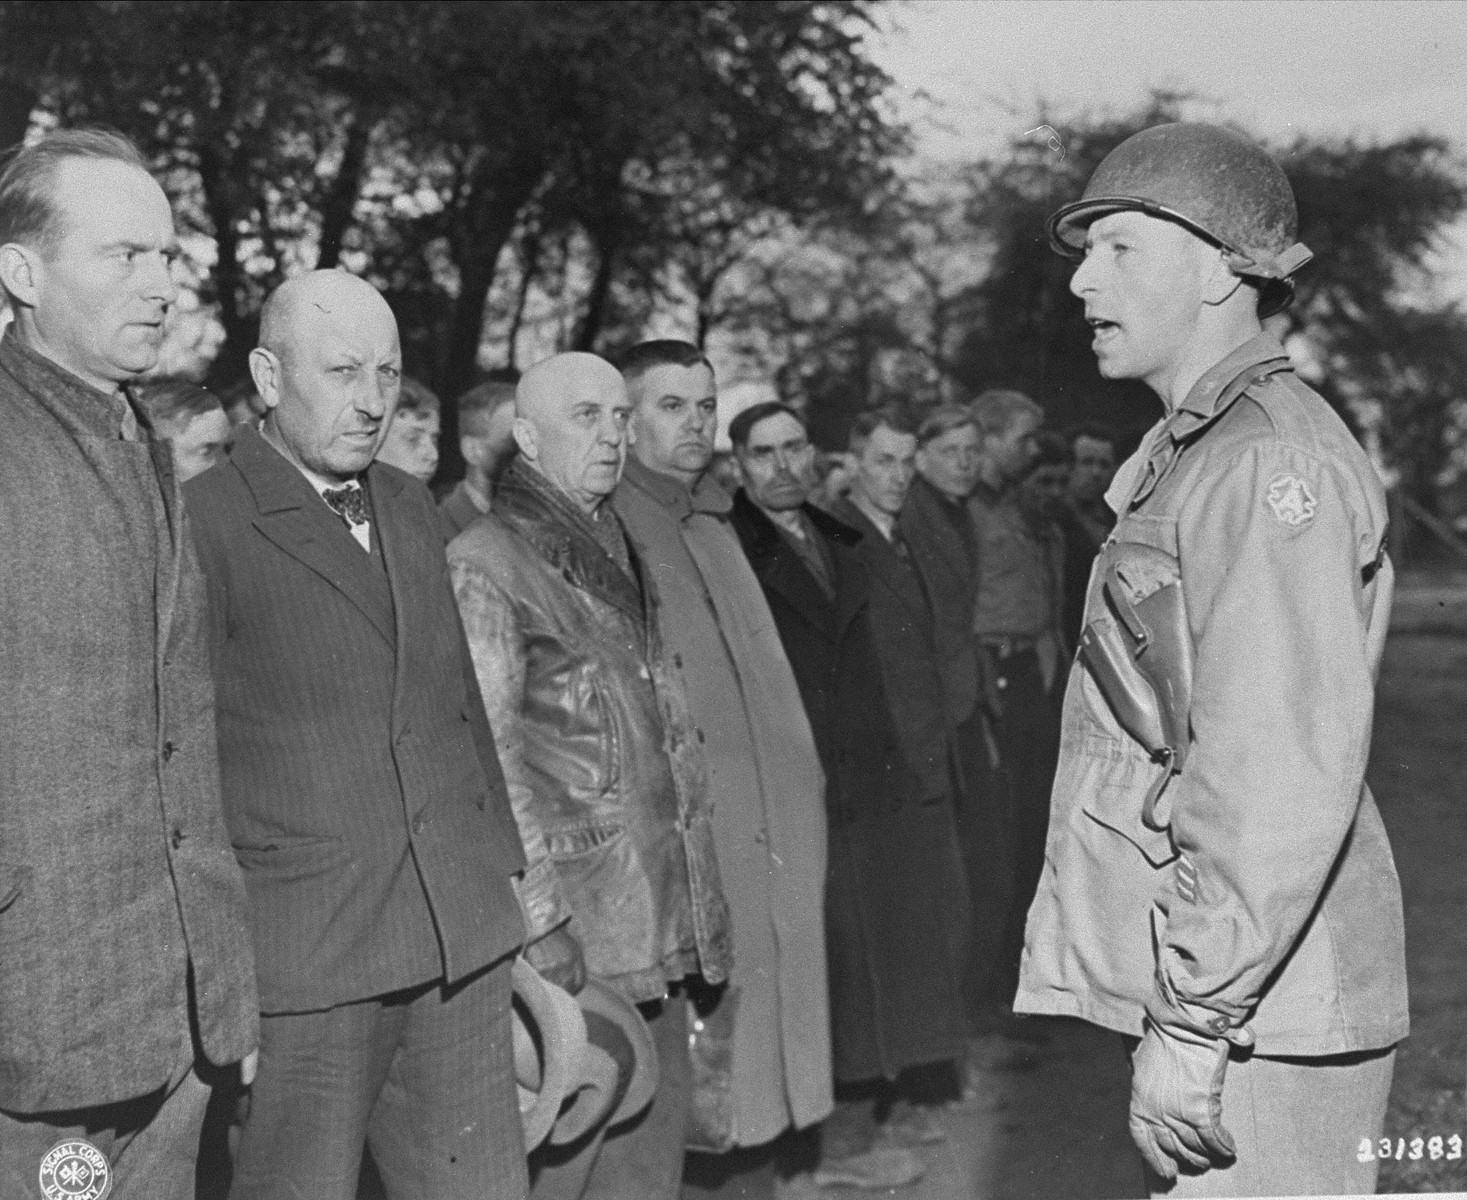 An American officer speaks to new German prisoners upon their arrival at the Recklinghausen internment camp, which was established by the U.S. Ninth Army.

When U.S. Ninth Army troops captured the concentration camp for Soviet civilians located near Recklinghausen, Germany, they converted it into a separation center for prisoners of war and war criminals.  After the first German prisoners arrived at the camp they were sent to the interrogation department, which was supervised by Captain Harold Puttfer and Lieutenant H. Goodman.  The camp had three sections called "cages."  One of these was for women, another for persons incarcerated for minor offenses, and the third for hardened criminals.  All three sections were filled to capacity, totalling 20,000 prisoners.